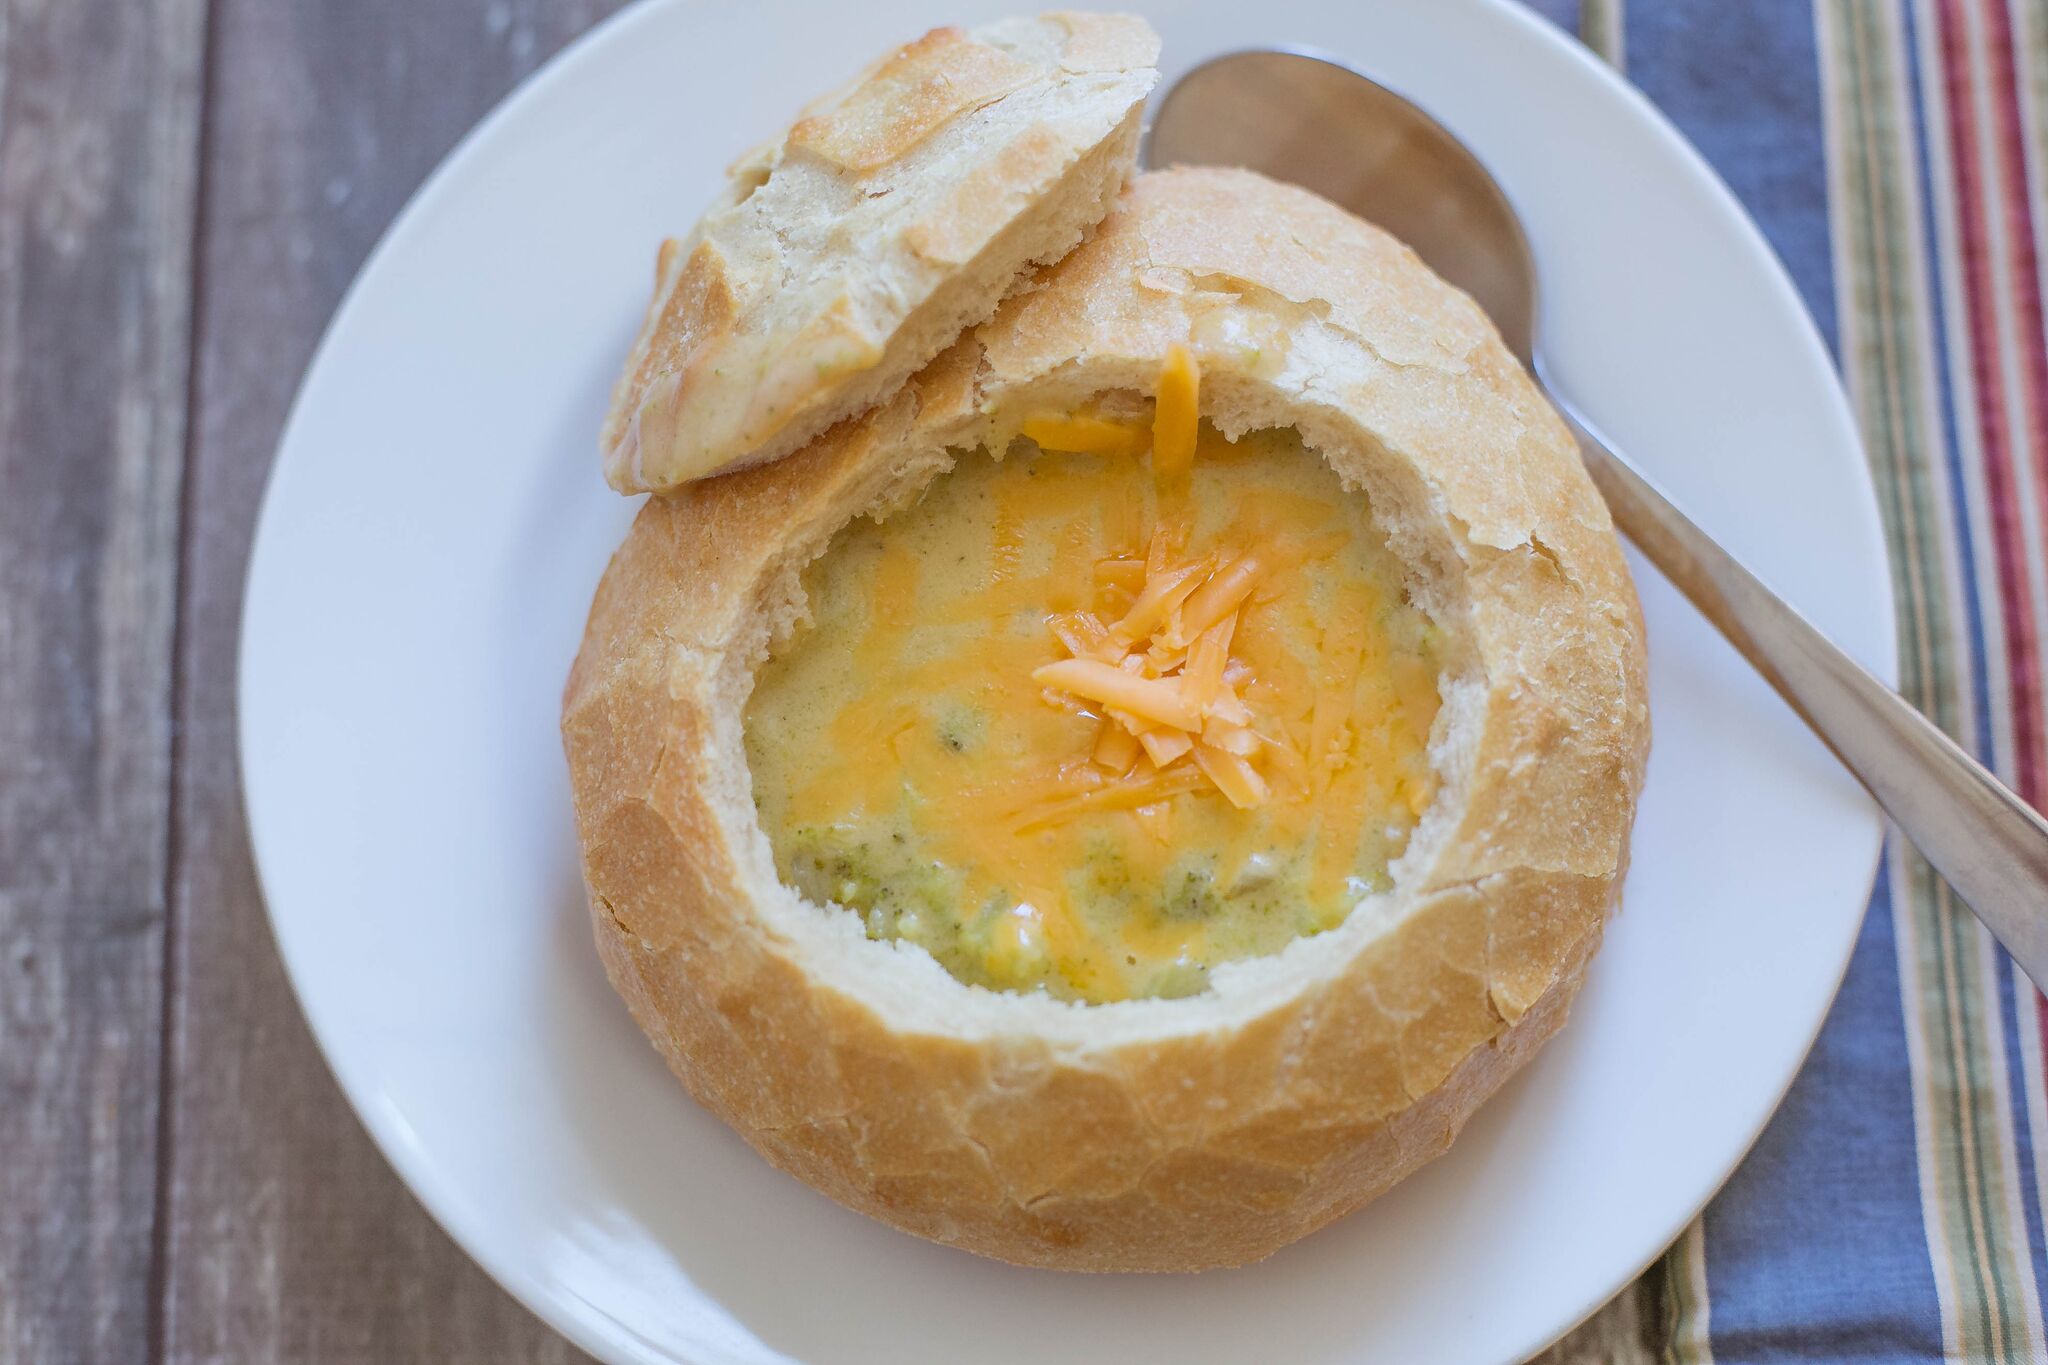 A perfect way to serve this broccoli cheese soup is in a sourdough bread bowl with a sprinkling of shredded cheese on top. 